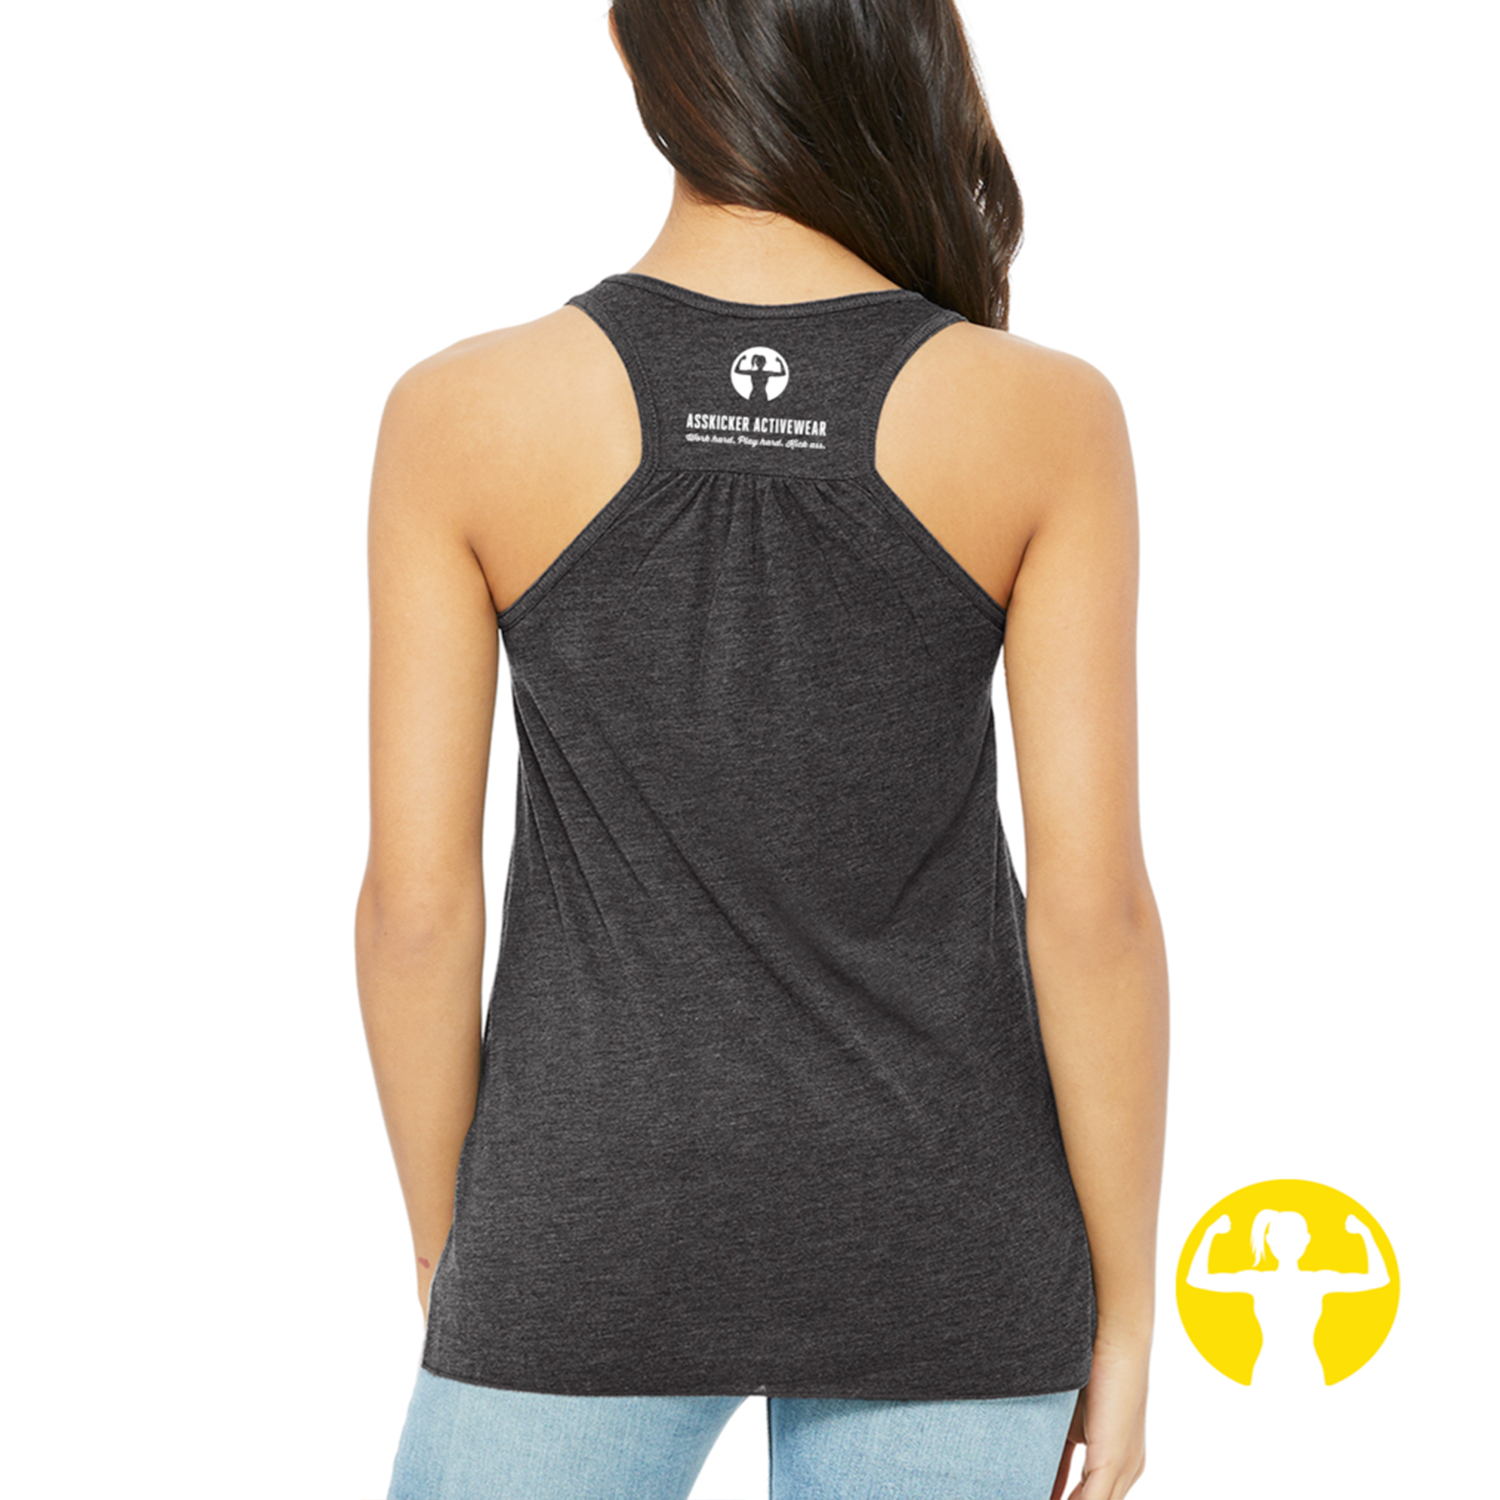 Hate you on the track, love you at the after party! Ultra Soft, Flowy Racerback Tank